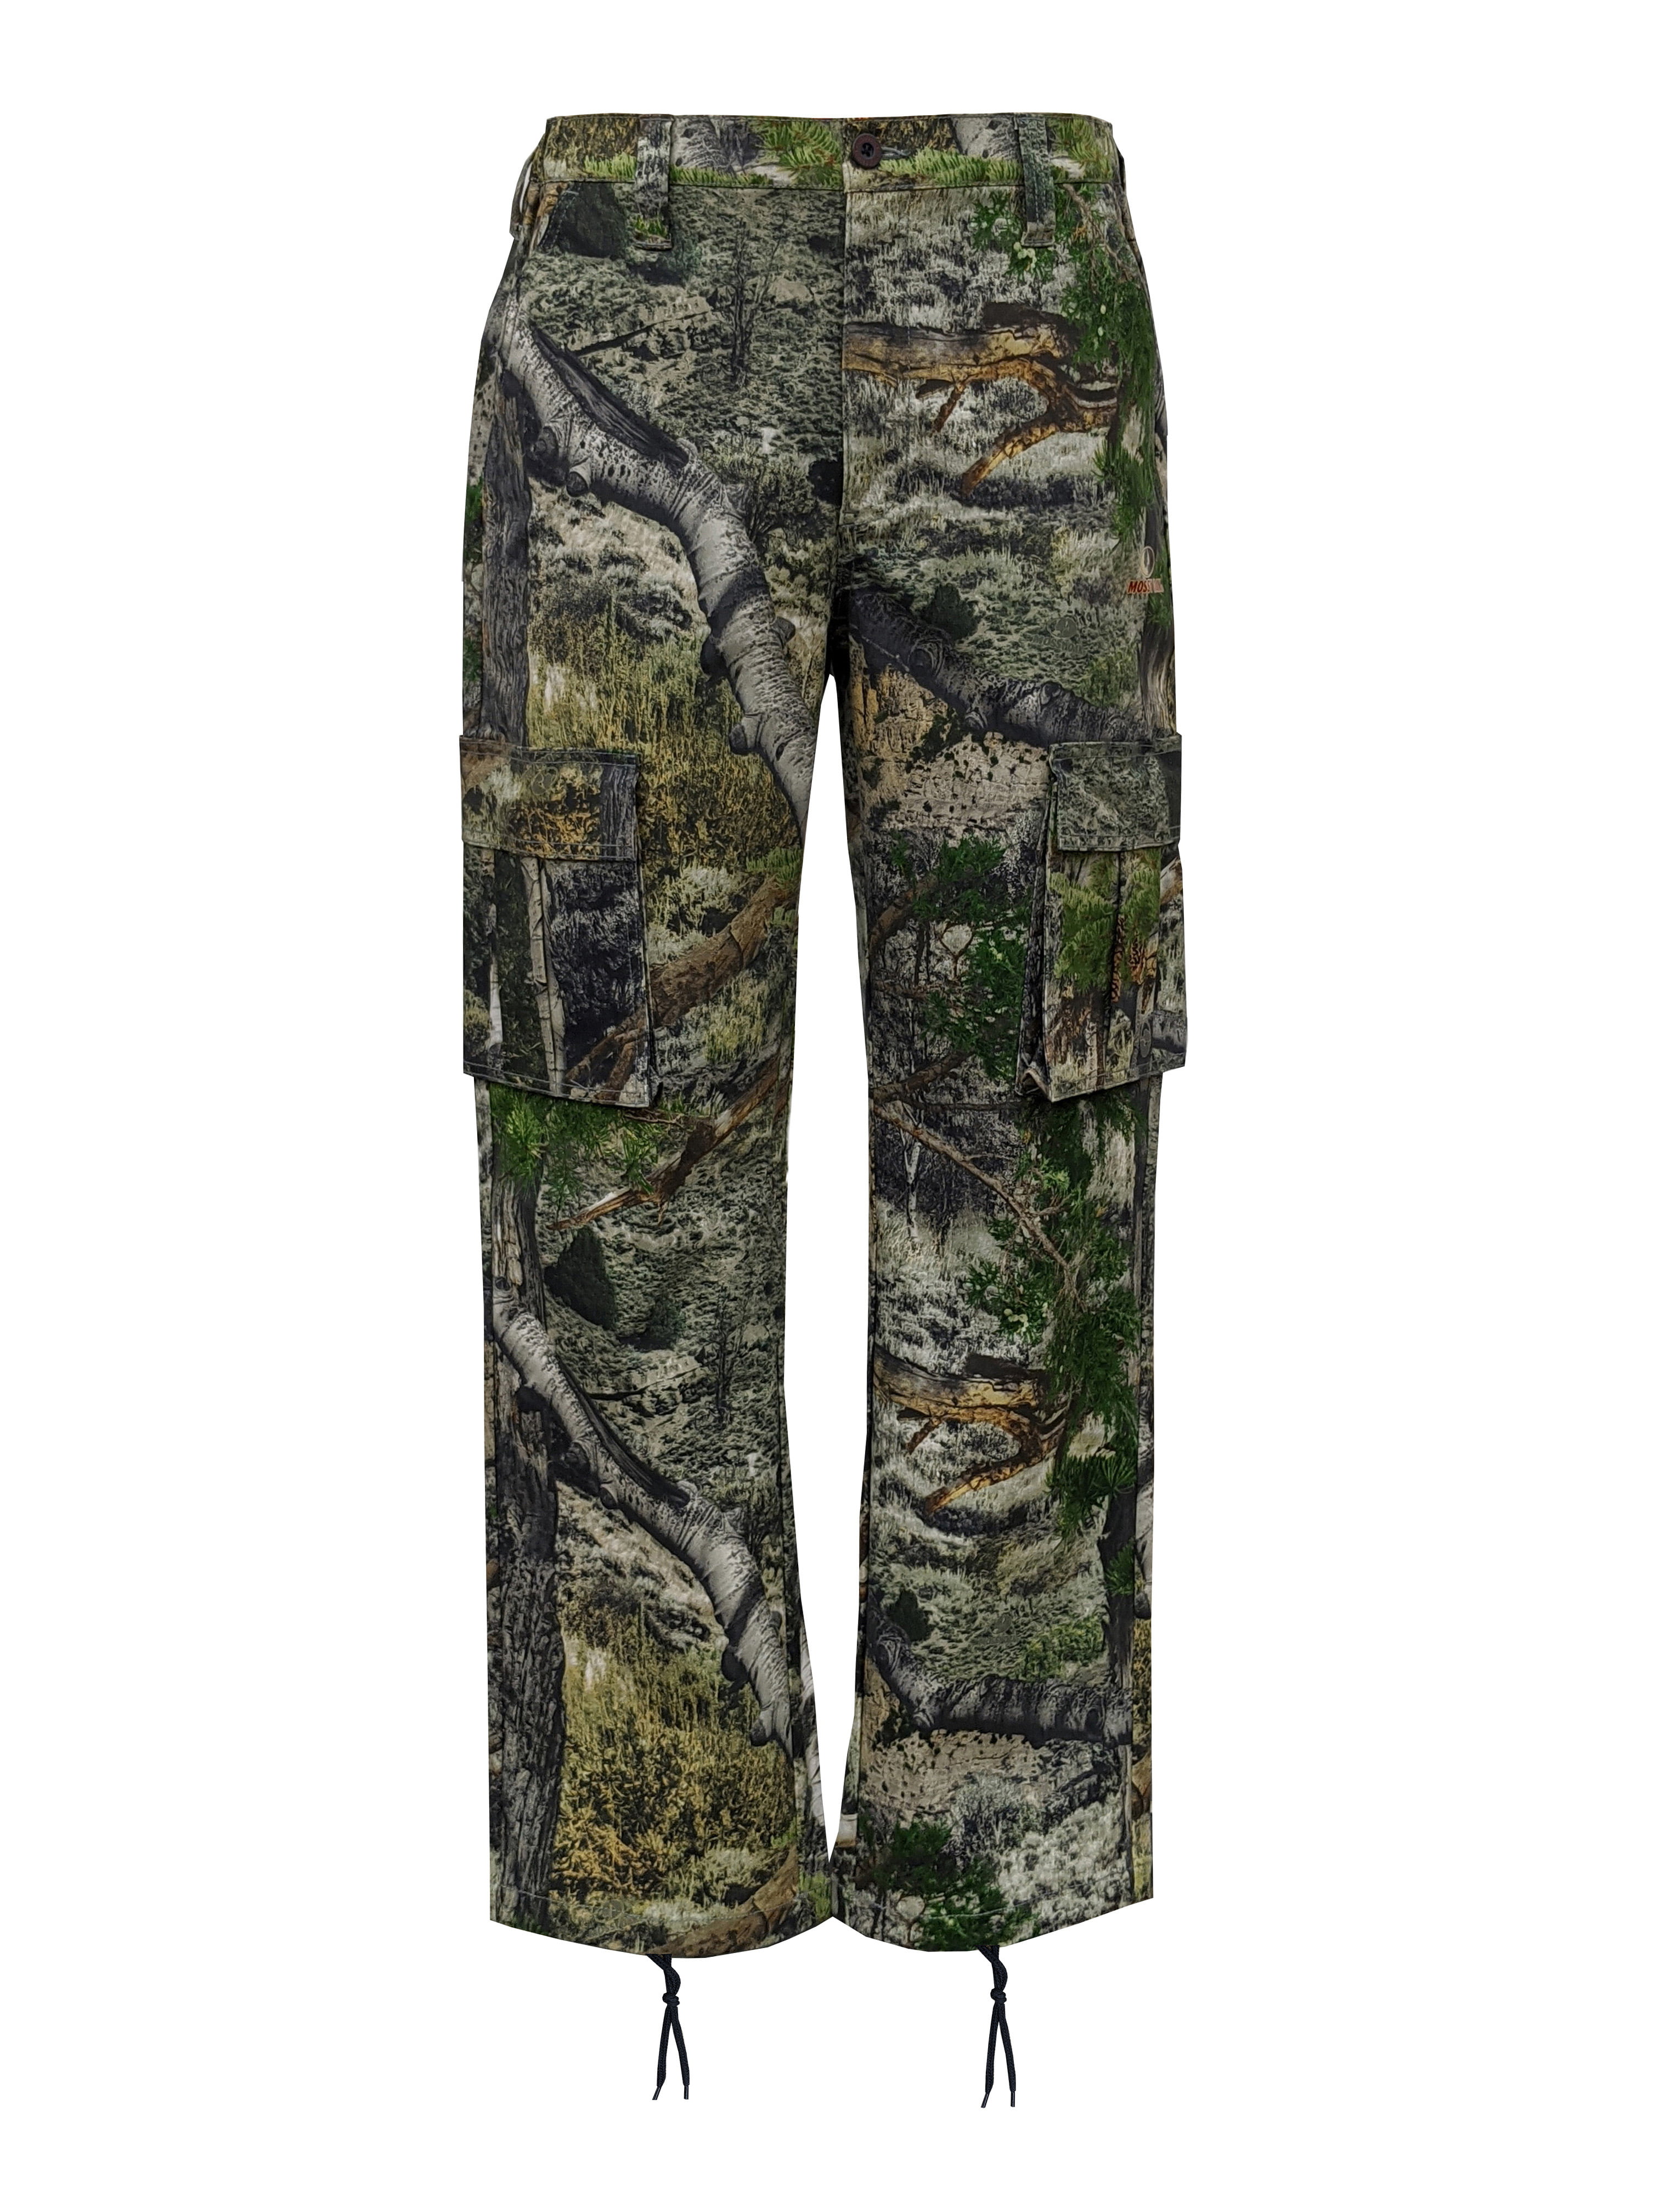 MOSSY OAK Mens Mountain Country Lightweight Cargo Pants NeW 